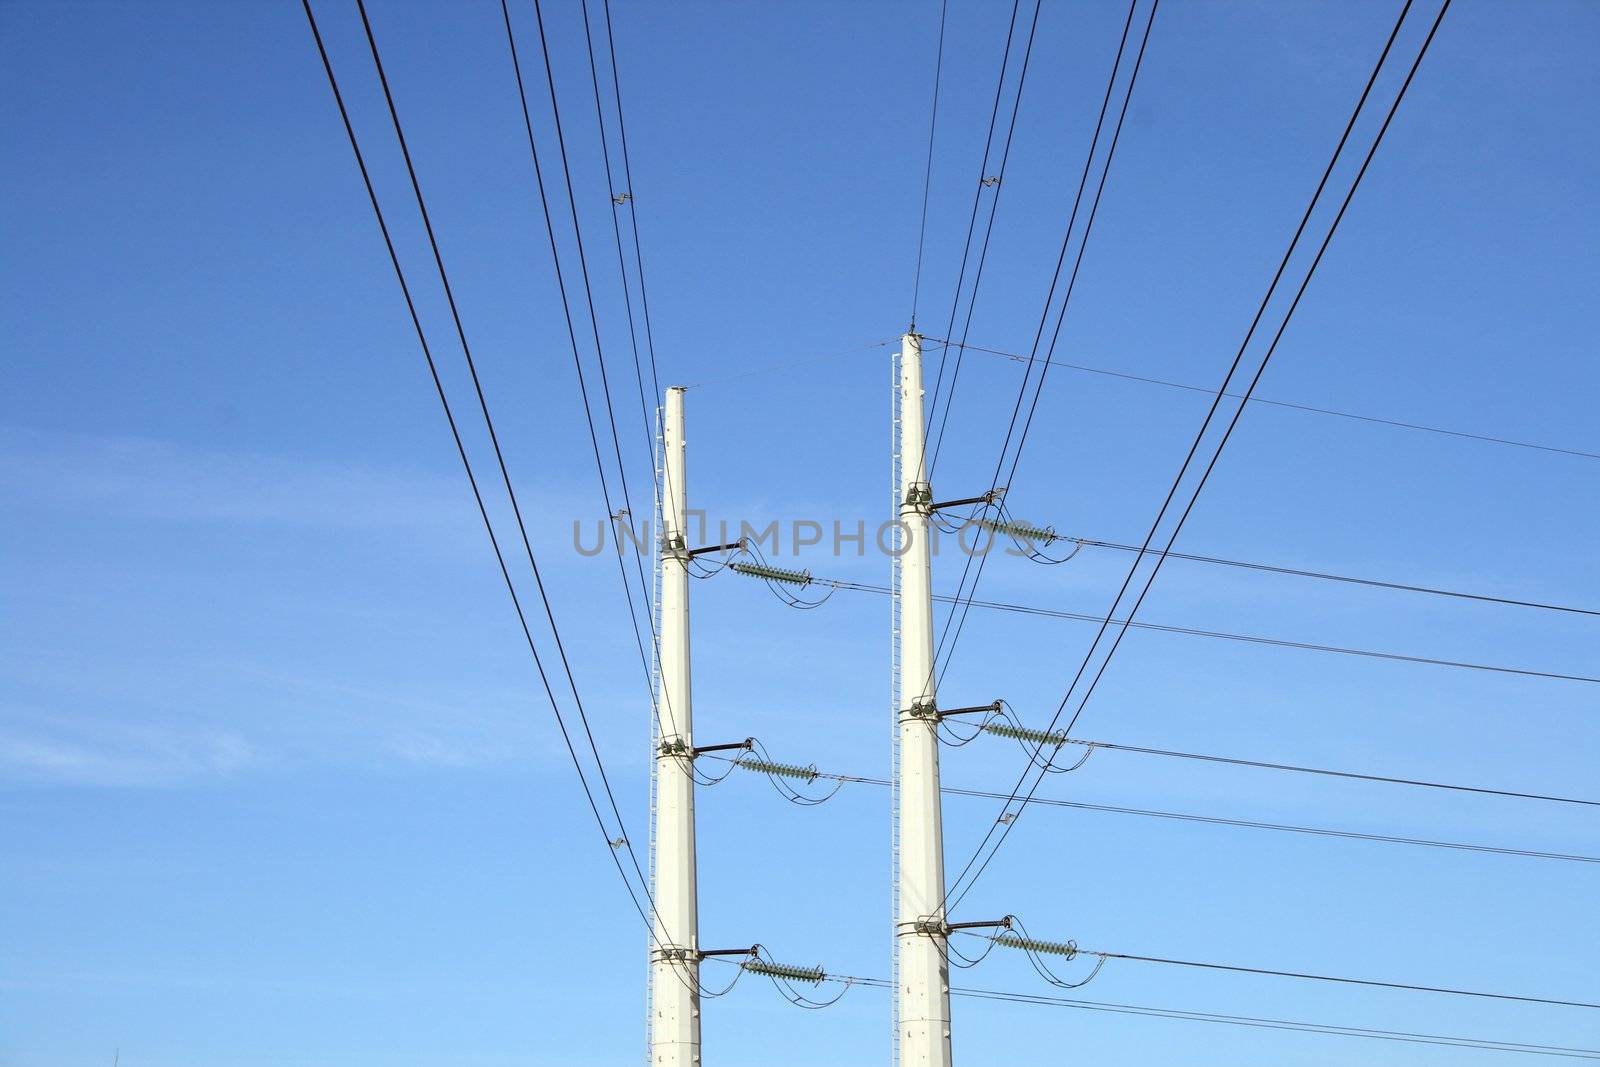 Two white electricity pylons, and wires stretching against the blue sky.